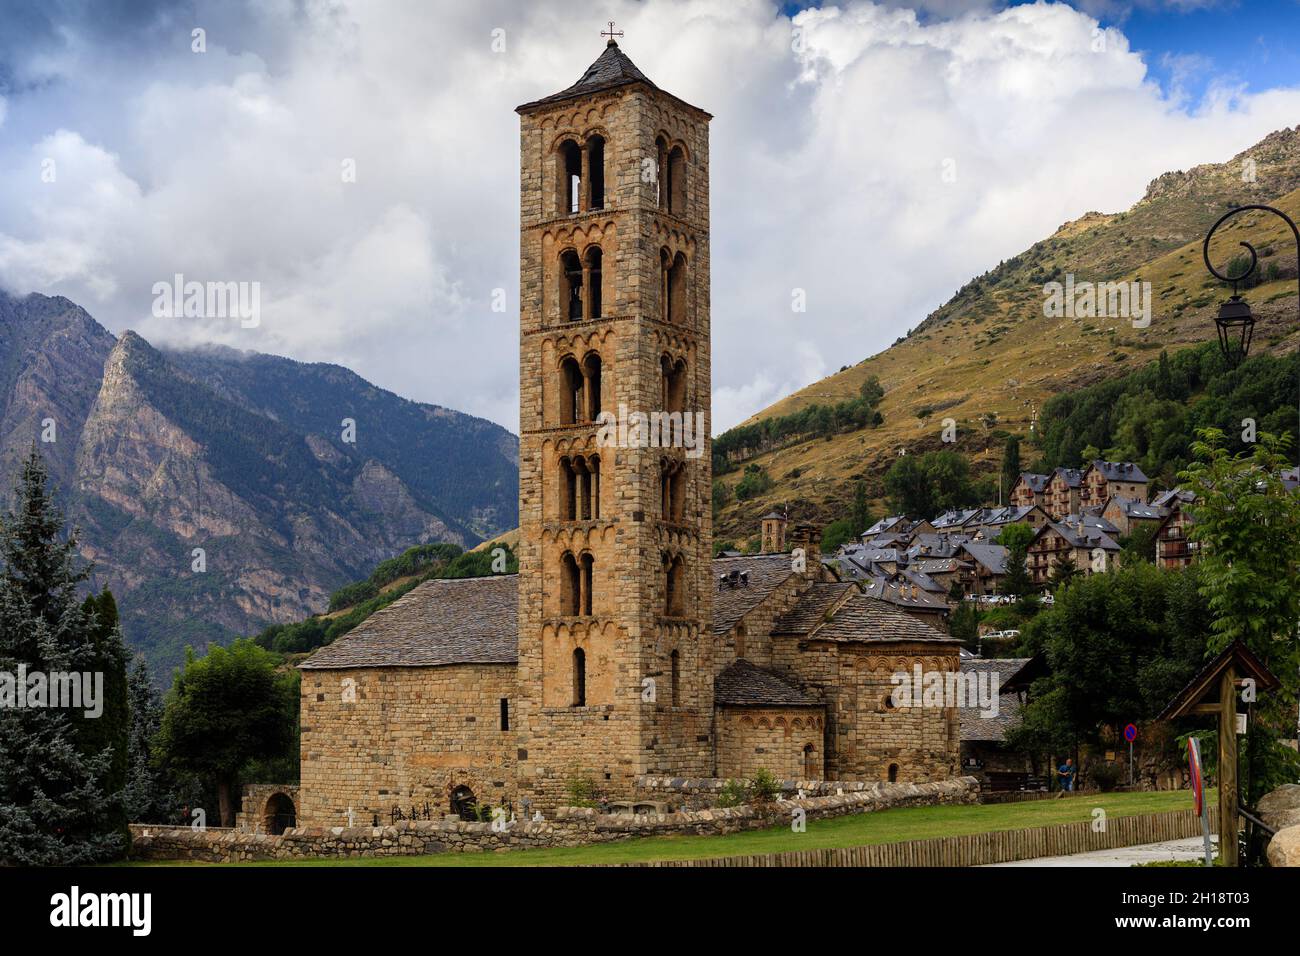 The romanesque church Sant Climent de Taull in the Boi Valley is a UNESCO World Heritage Site. Catalonia. Spain. Stock Photo